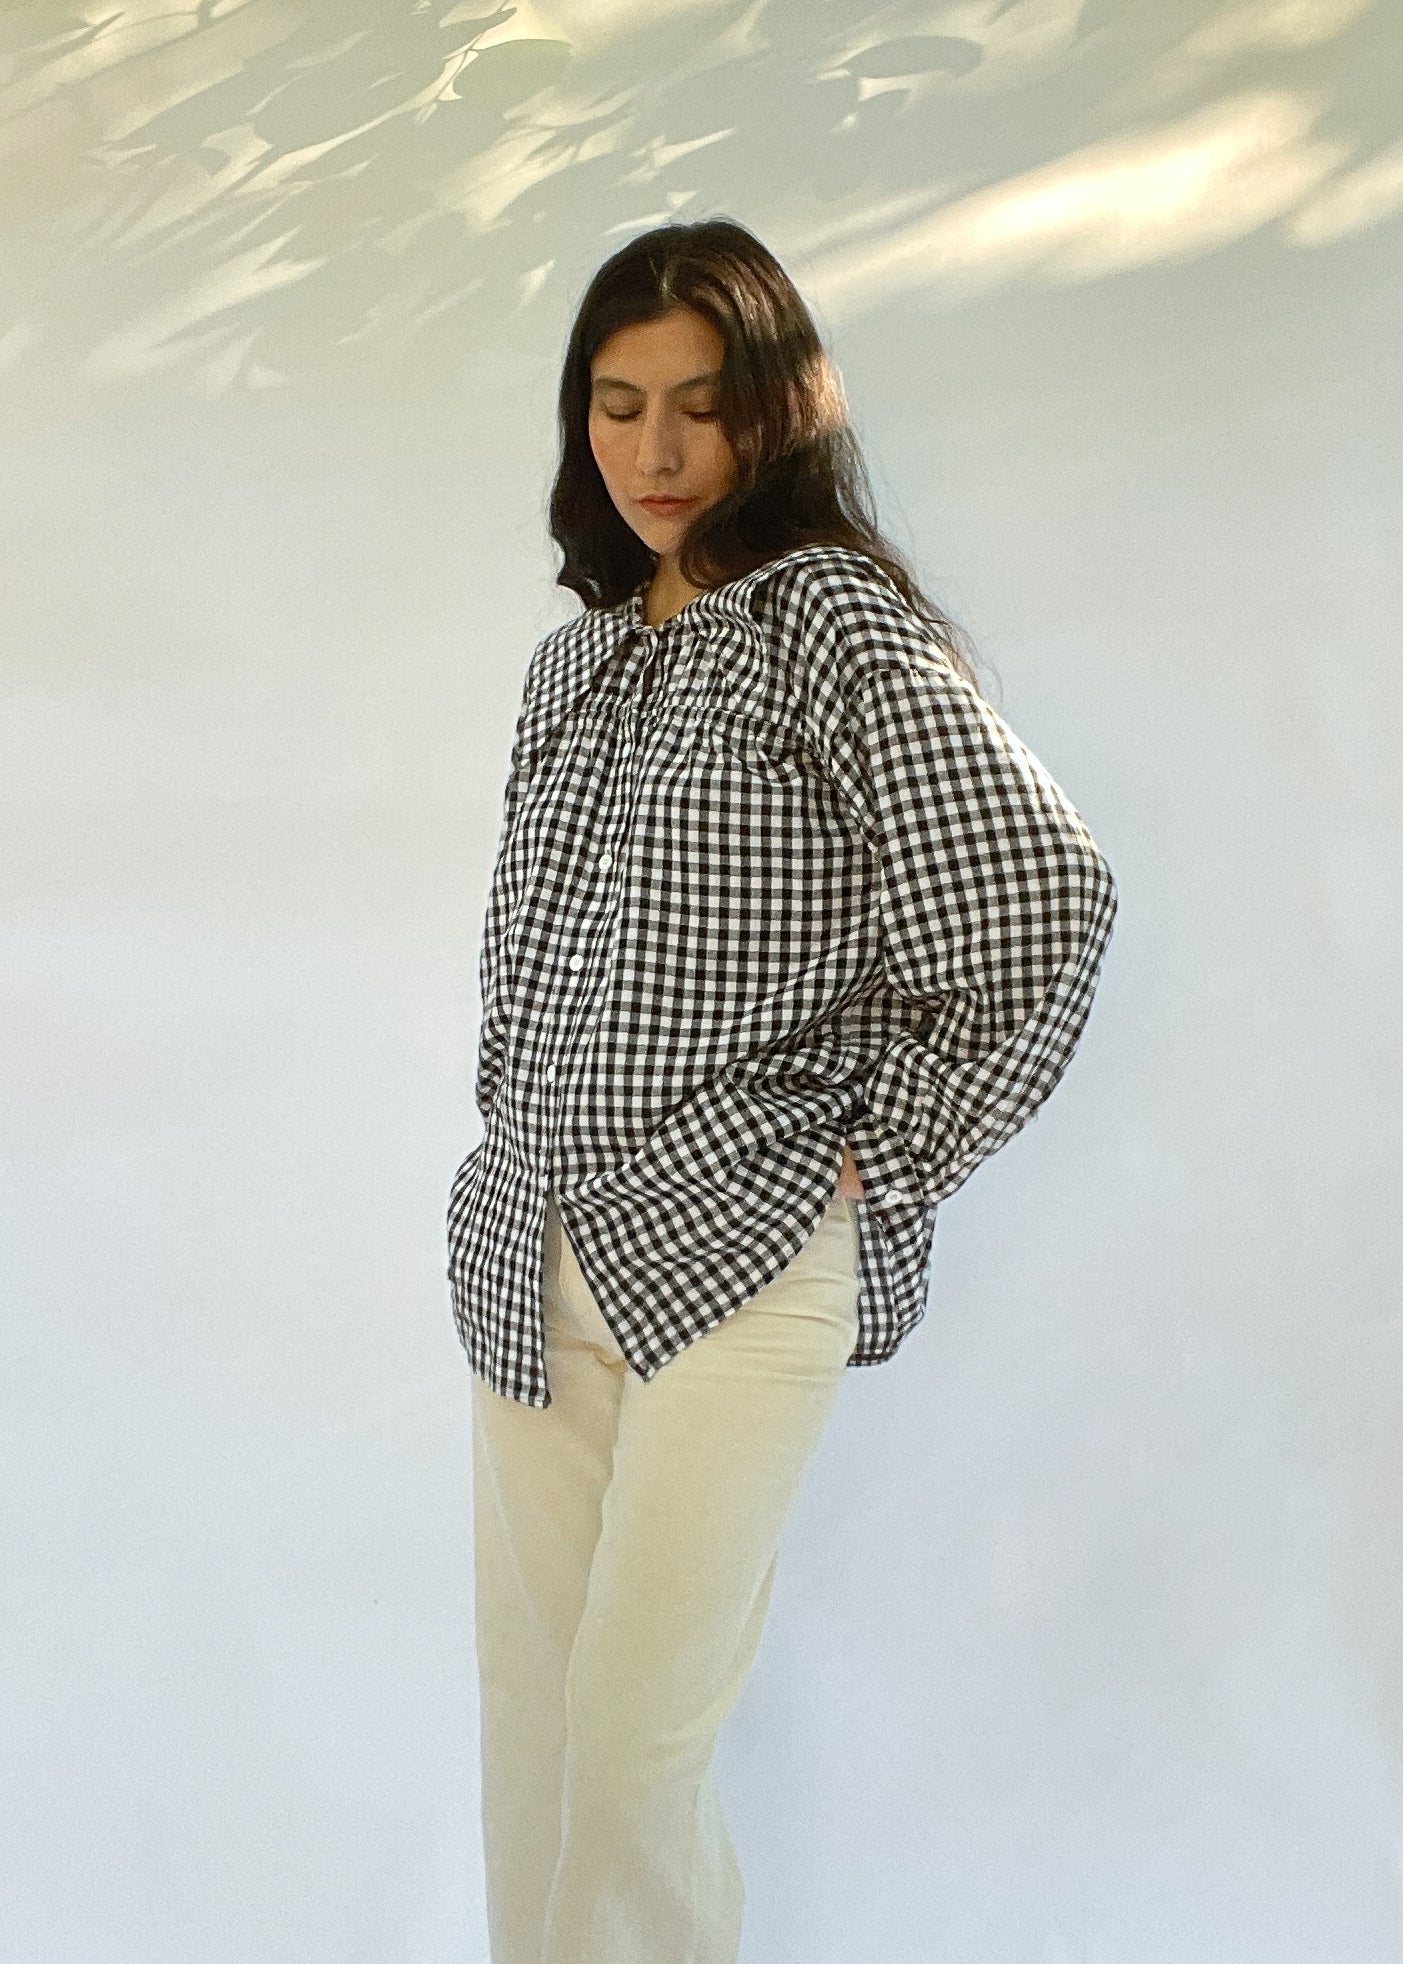 Vintage Gingham Collared Button Up Top | XS - XL